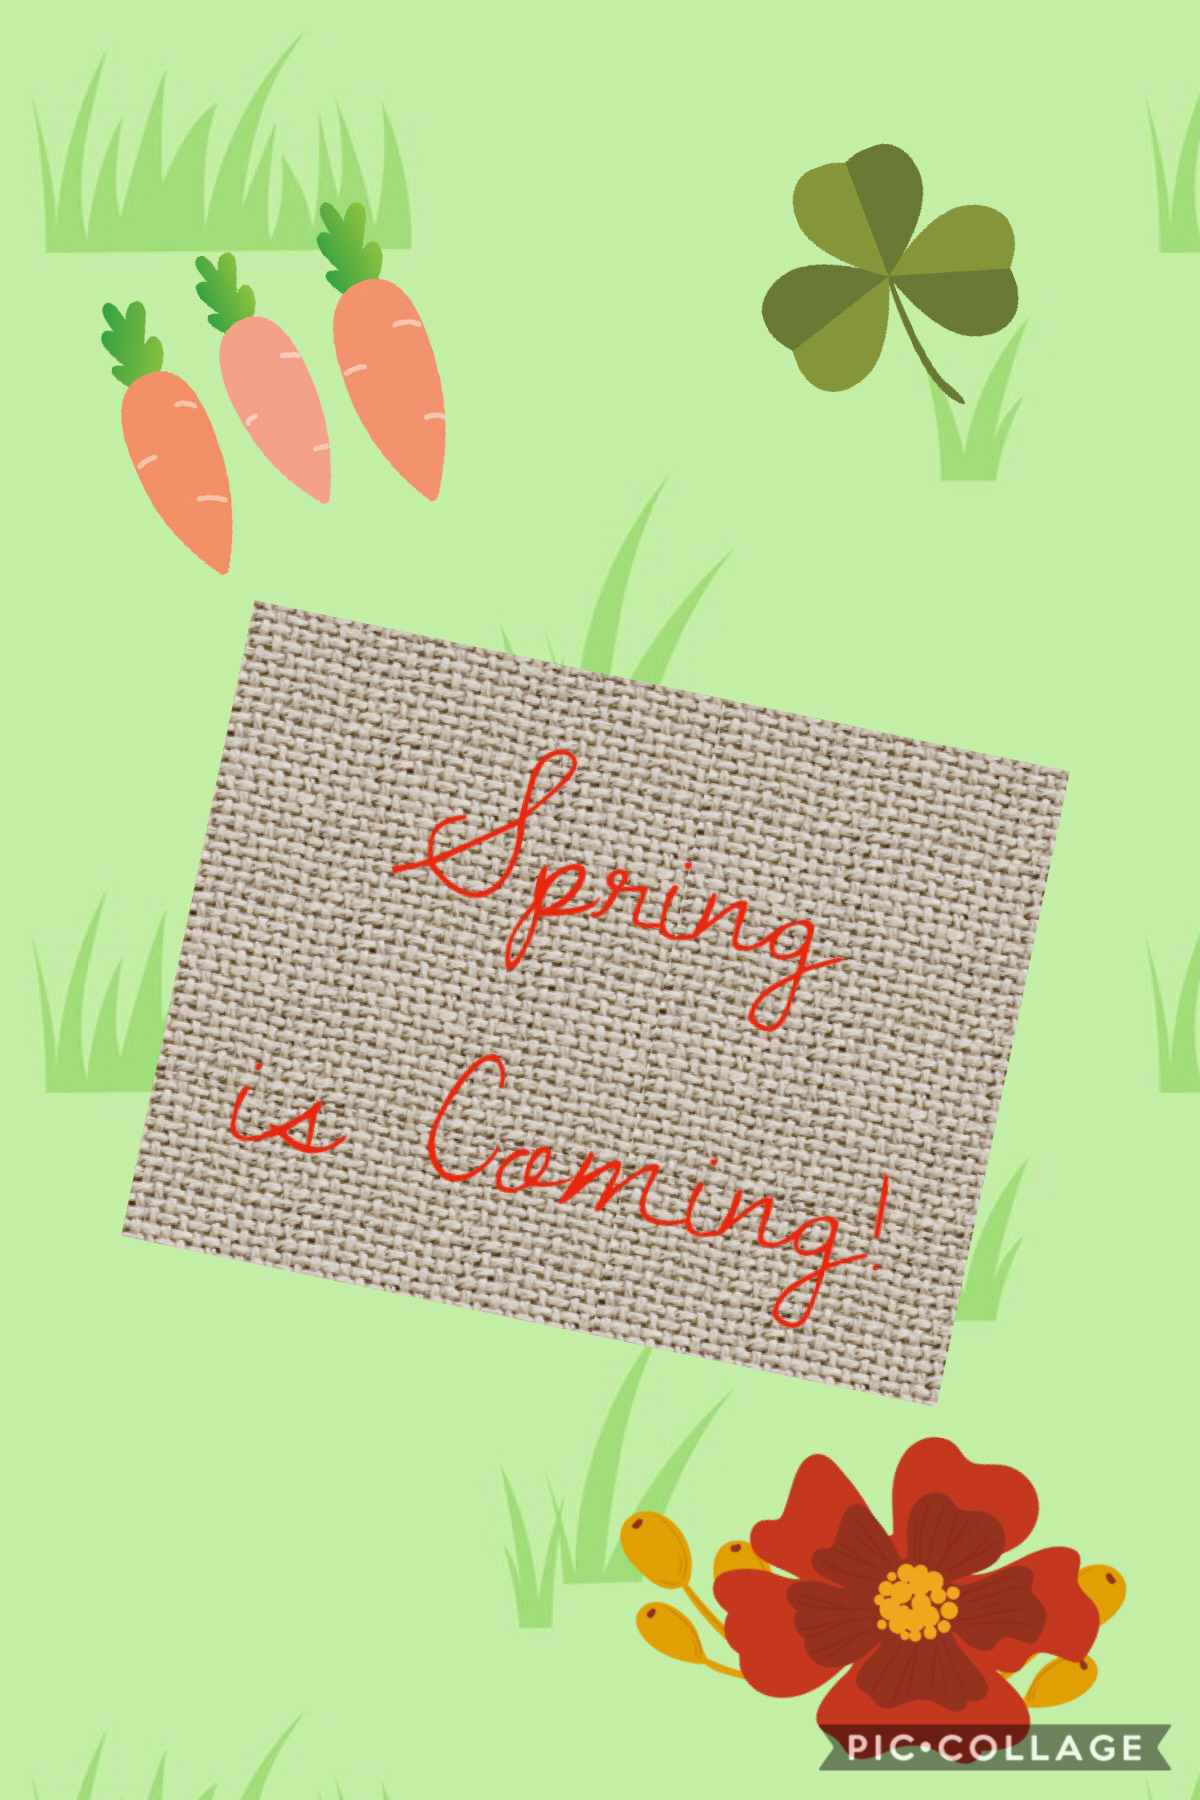 Spring is coming!